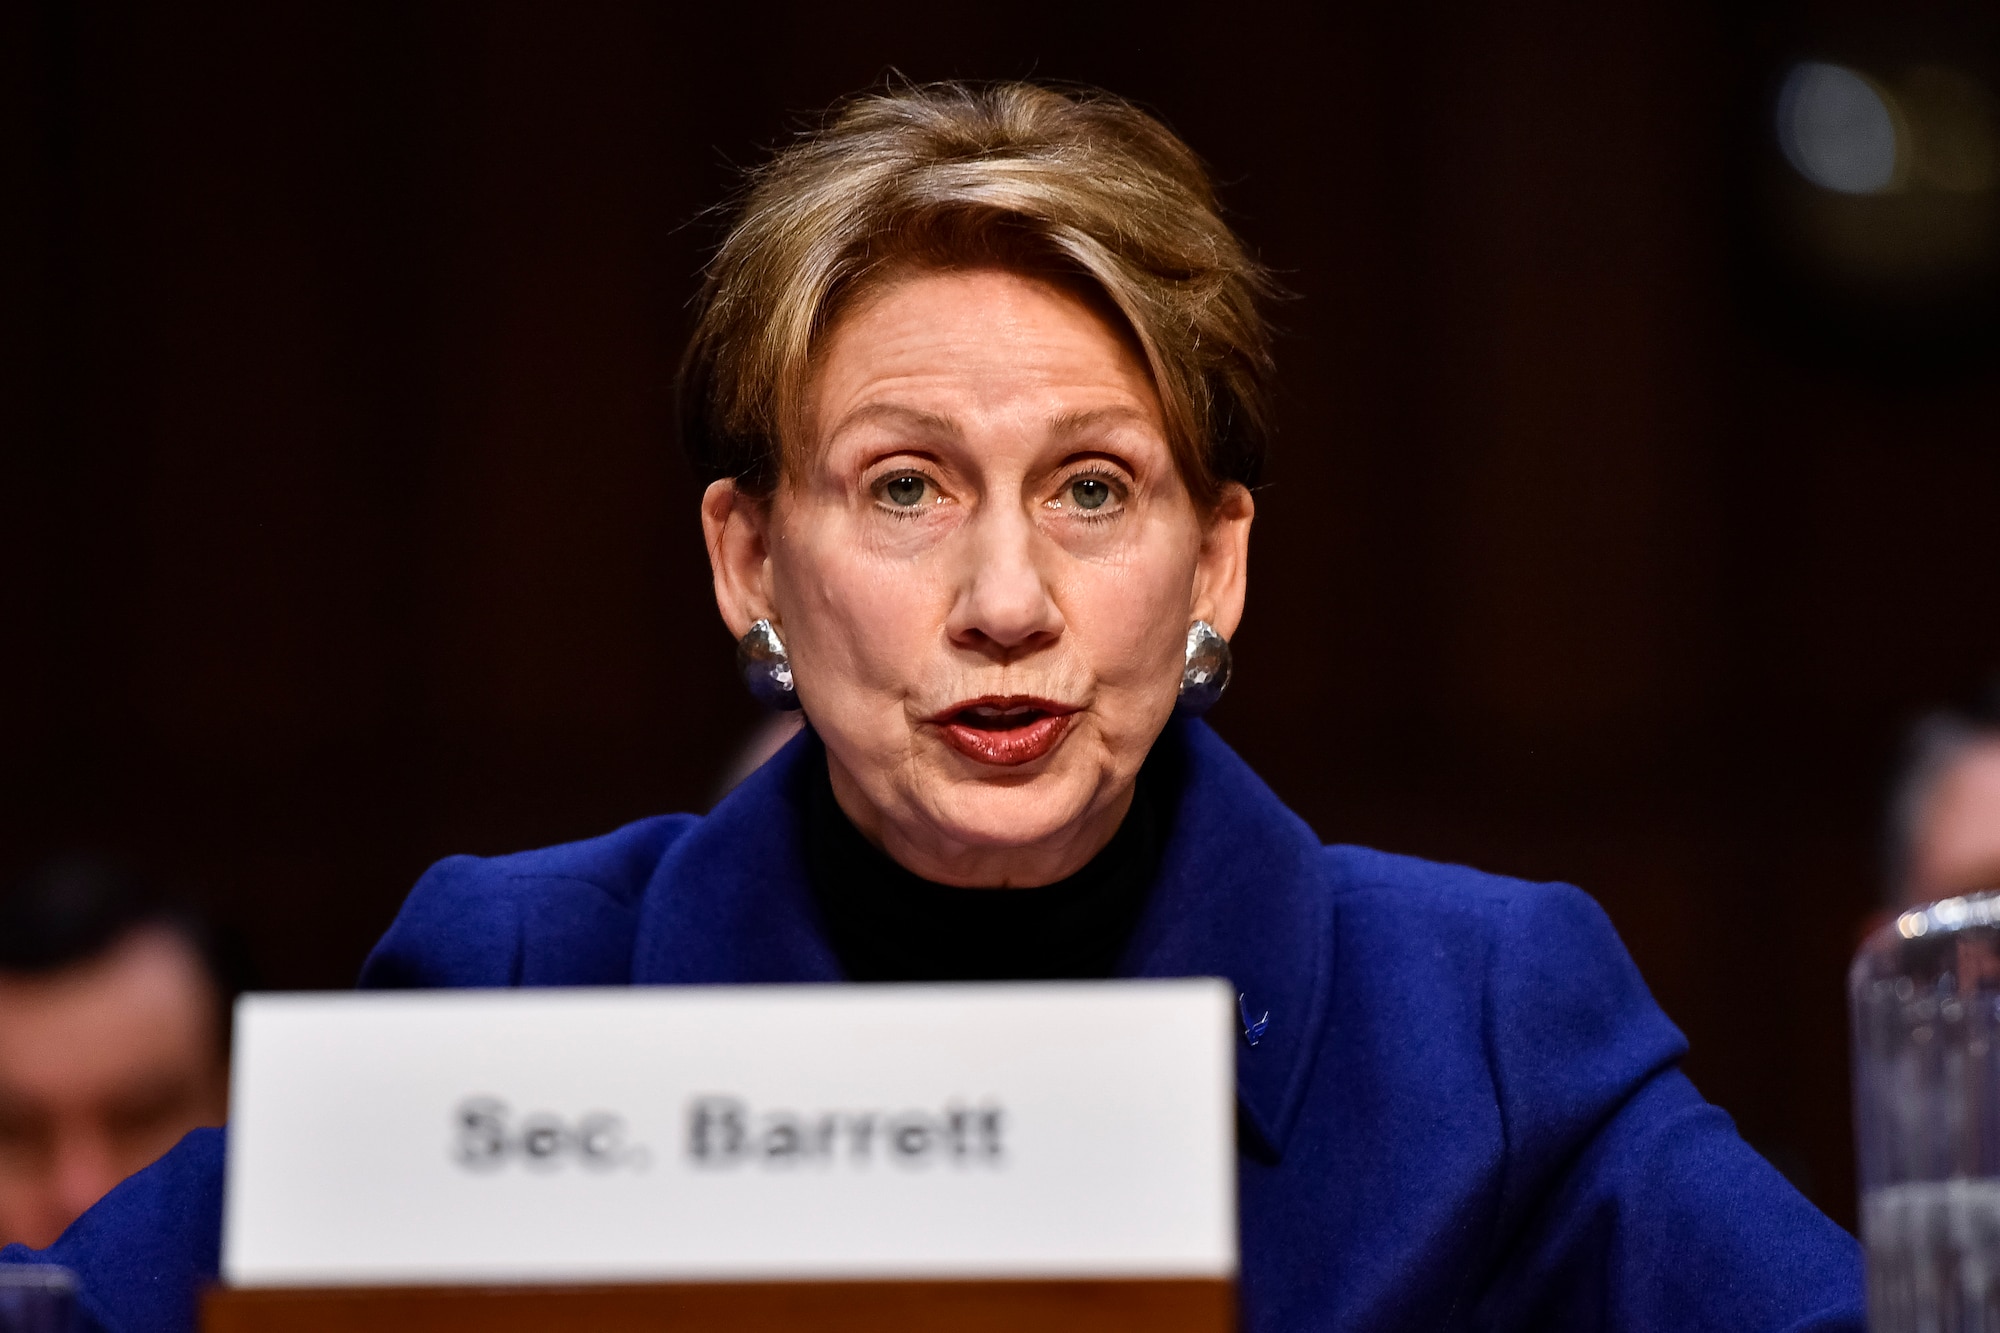 Air Force Secretary Barbara M. Barrett testifies on the posture of the Air Force before the Senate Armed Services Committee at the Hart Senate Office Building in Washington, D.C., March 3, 2020. (U.S. Air Force photo by Eric Dietrich)